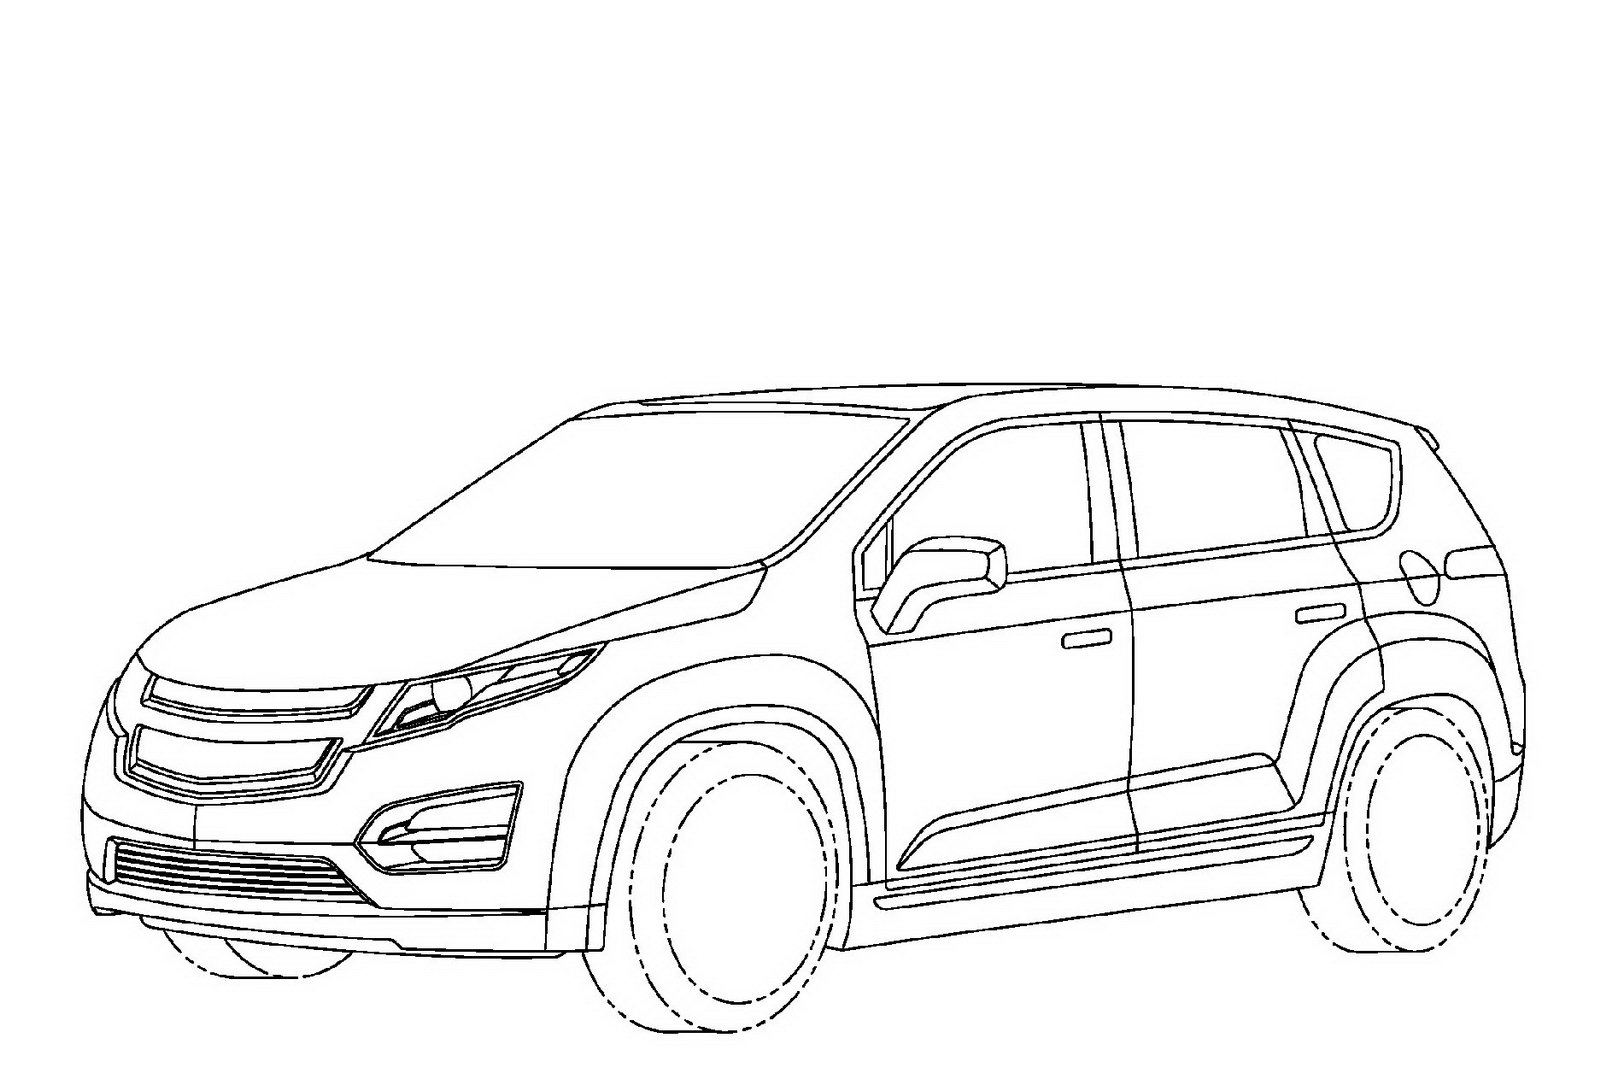 Chevy Mini Van Coloring Page - Get Coloring Pages